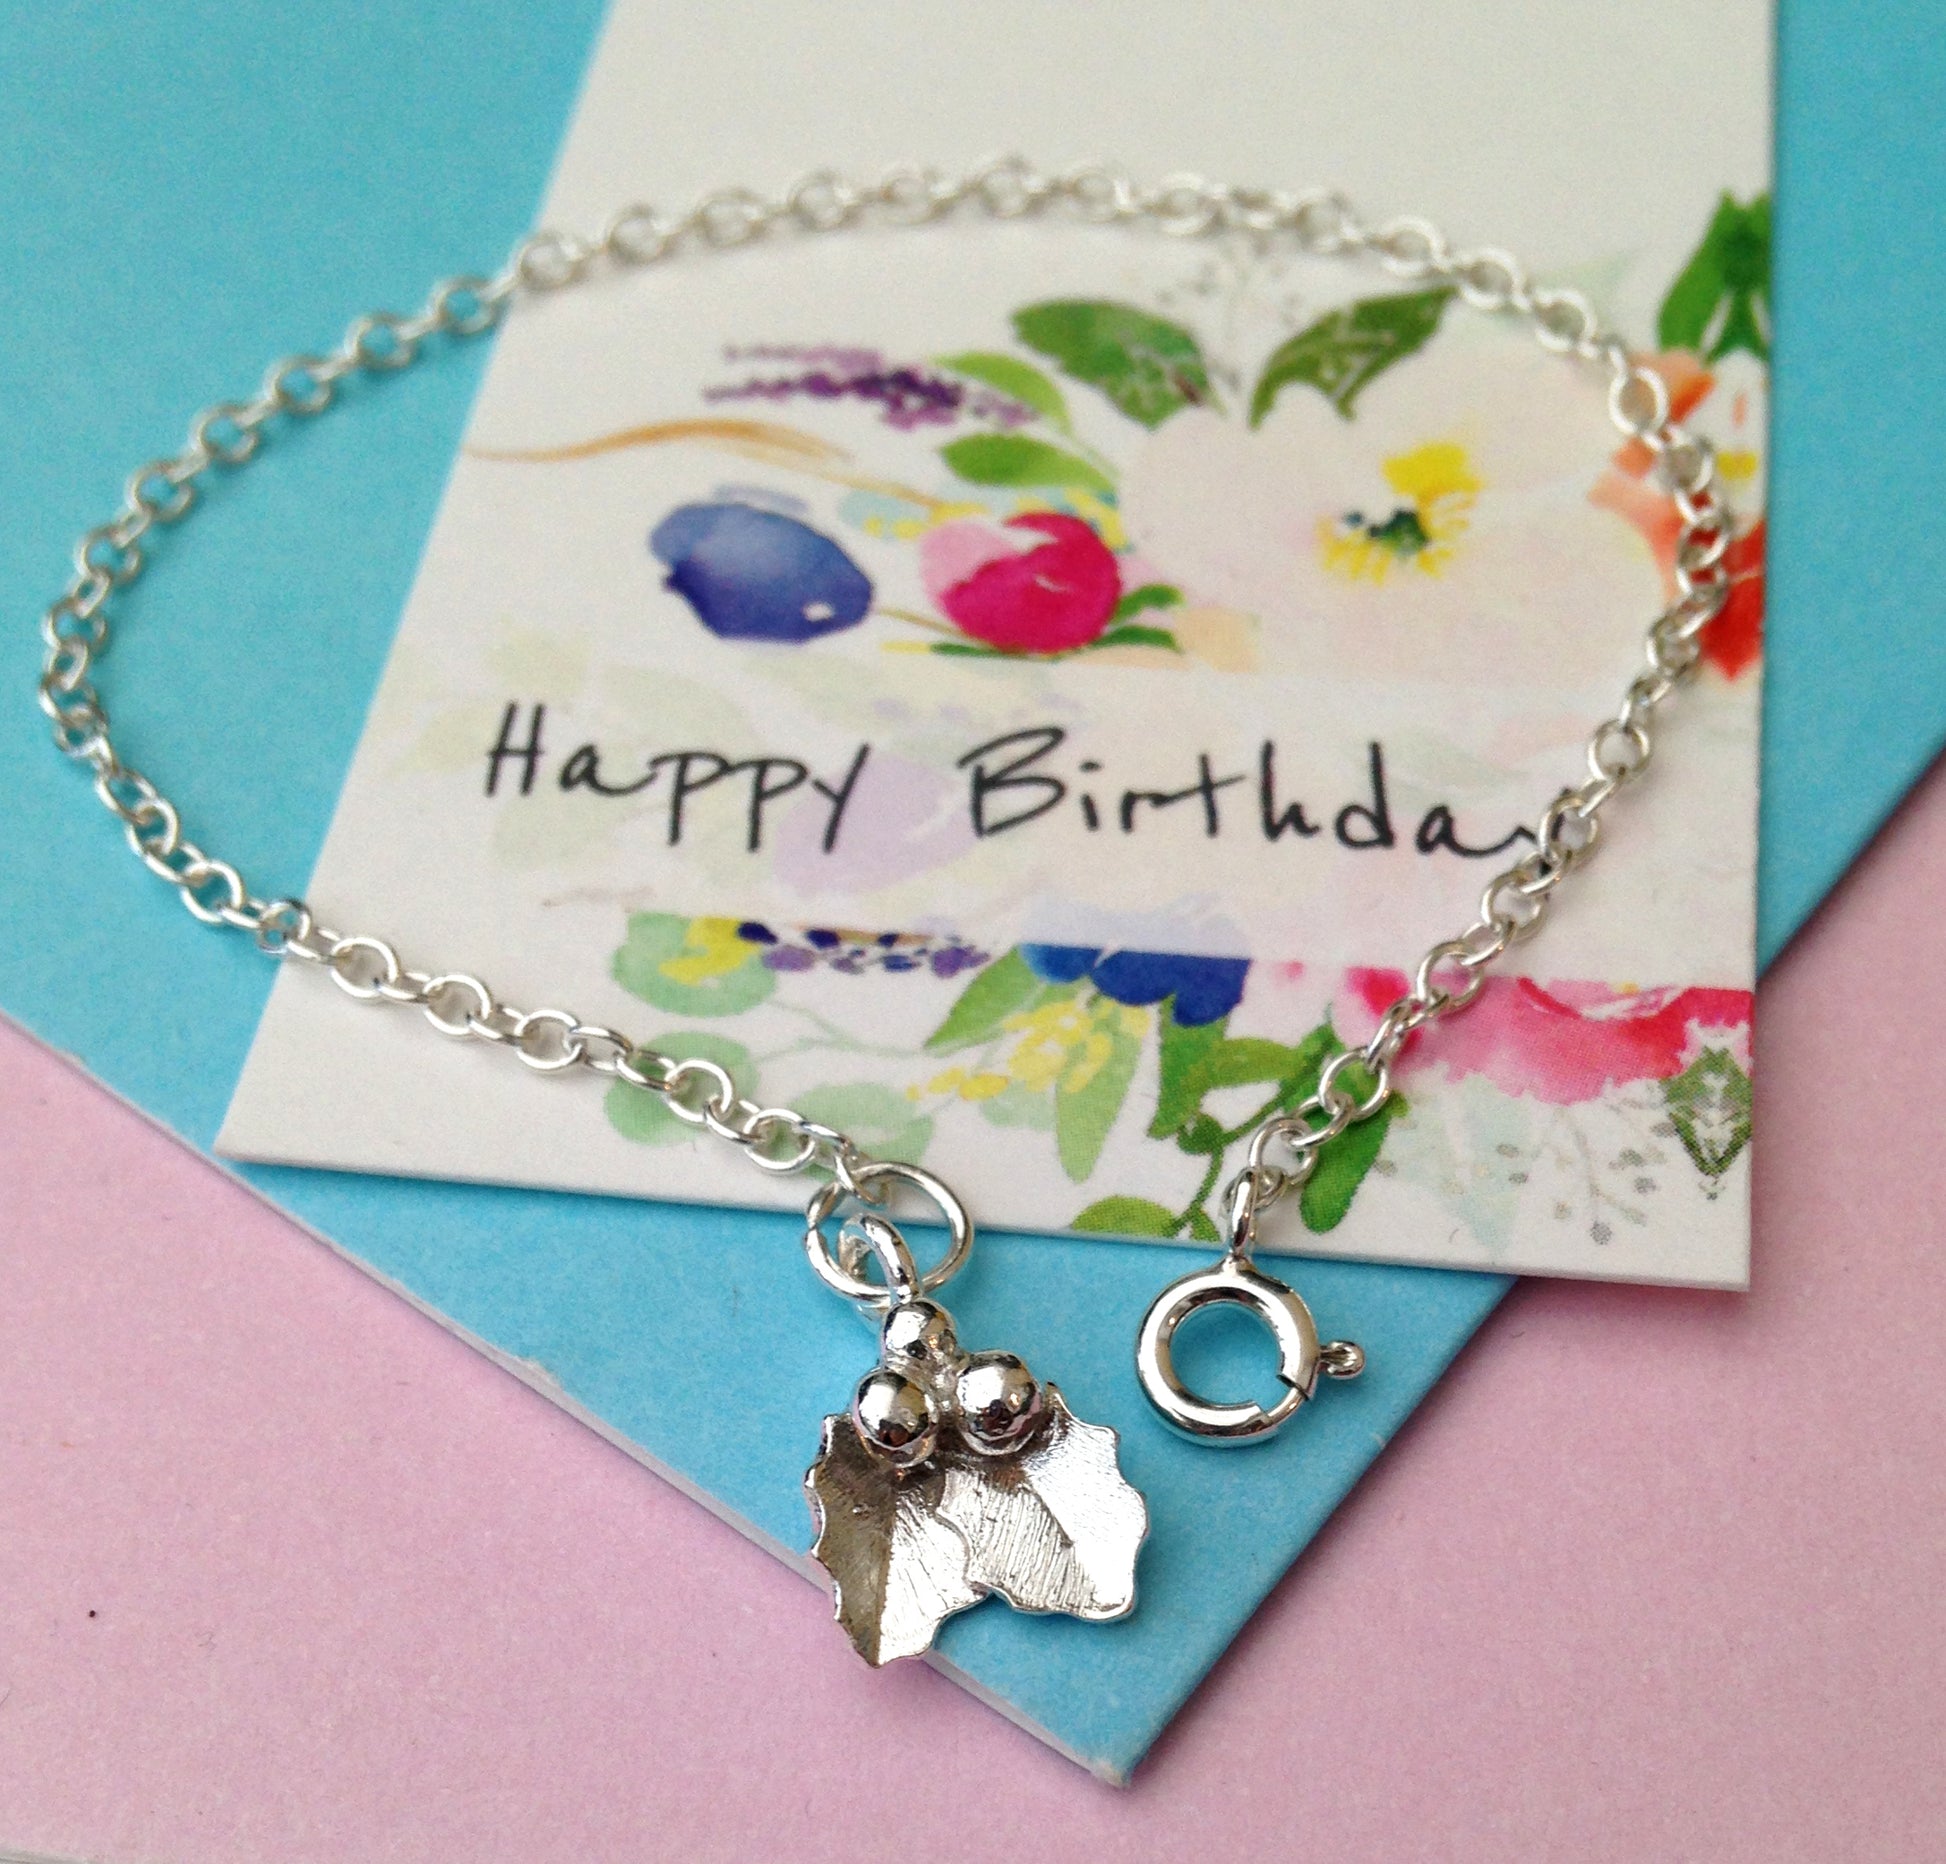 holly bracelet with happy birthday gift card